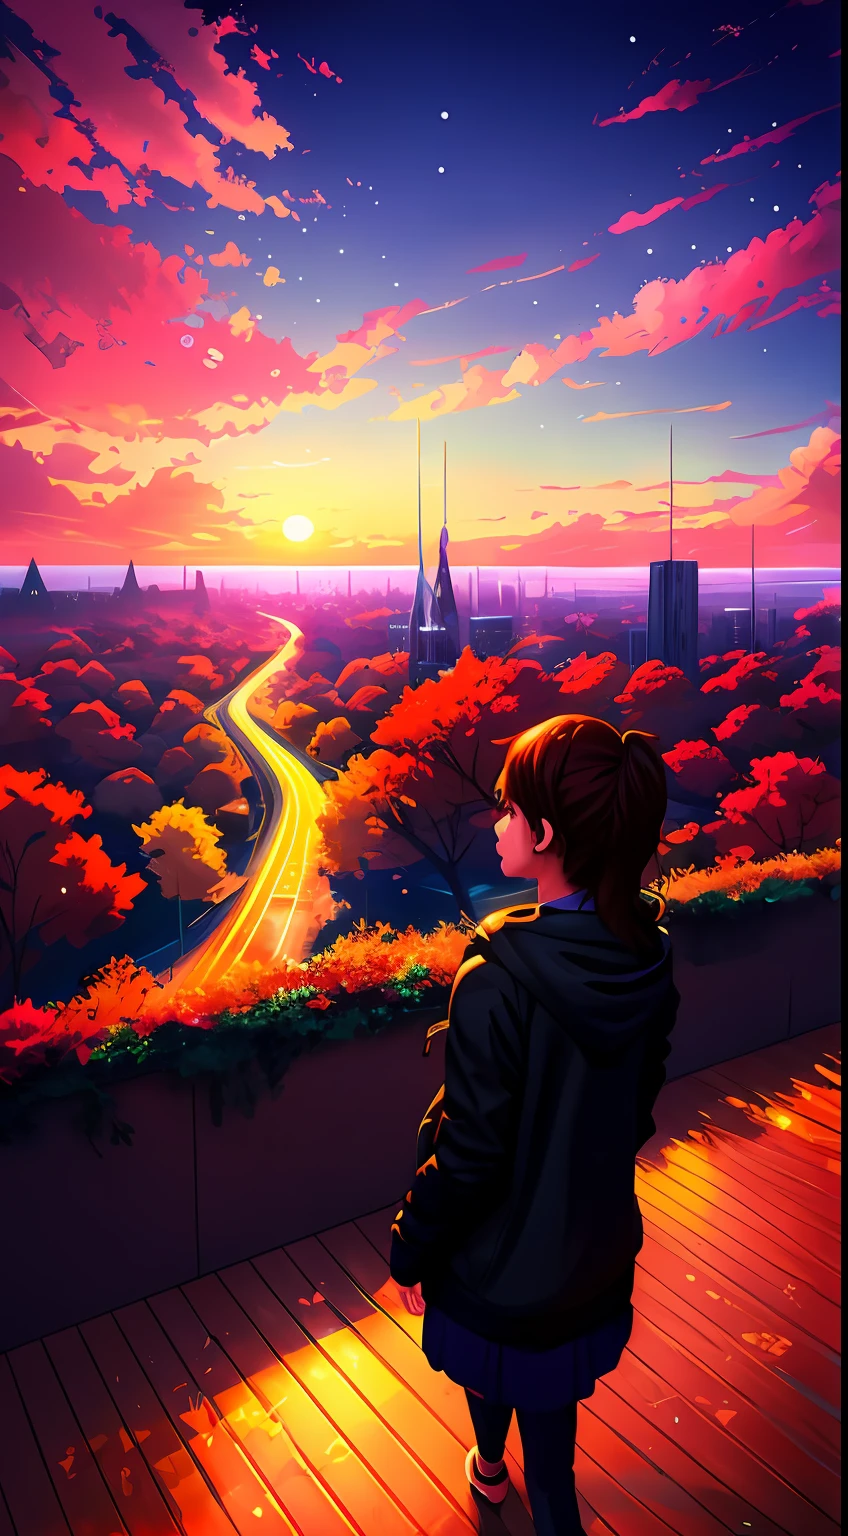 a girl watches the sunset from a rooftop by Makoto Shinkai, by Makoto Shinkai, 新海誠 シリル・ロランド, 新海誠のスタイル, アニメ. by Makoto Shinkai, realistic アニメ 3 d style, グウェイズ風のアートワーク, in 新海誠のスタイル